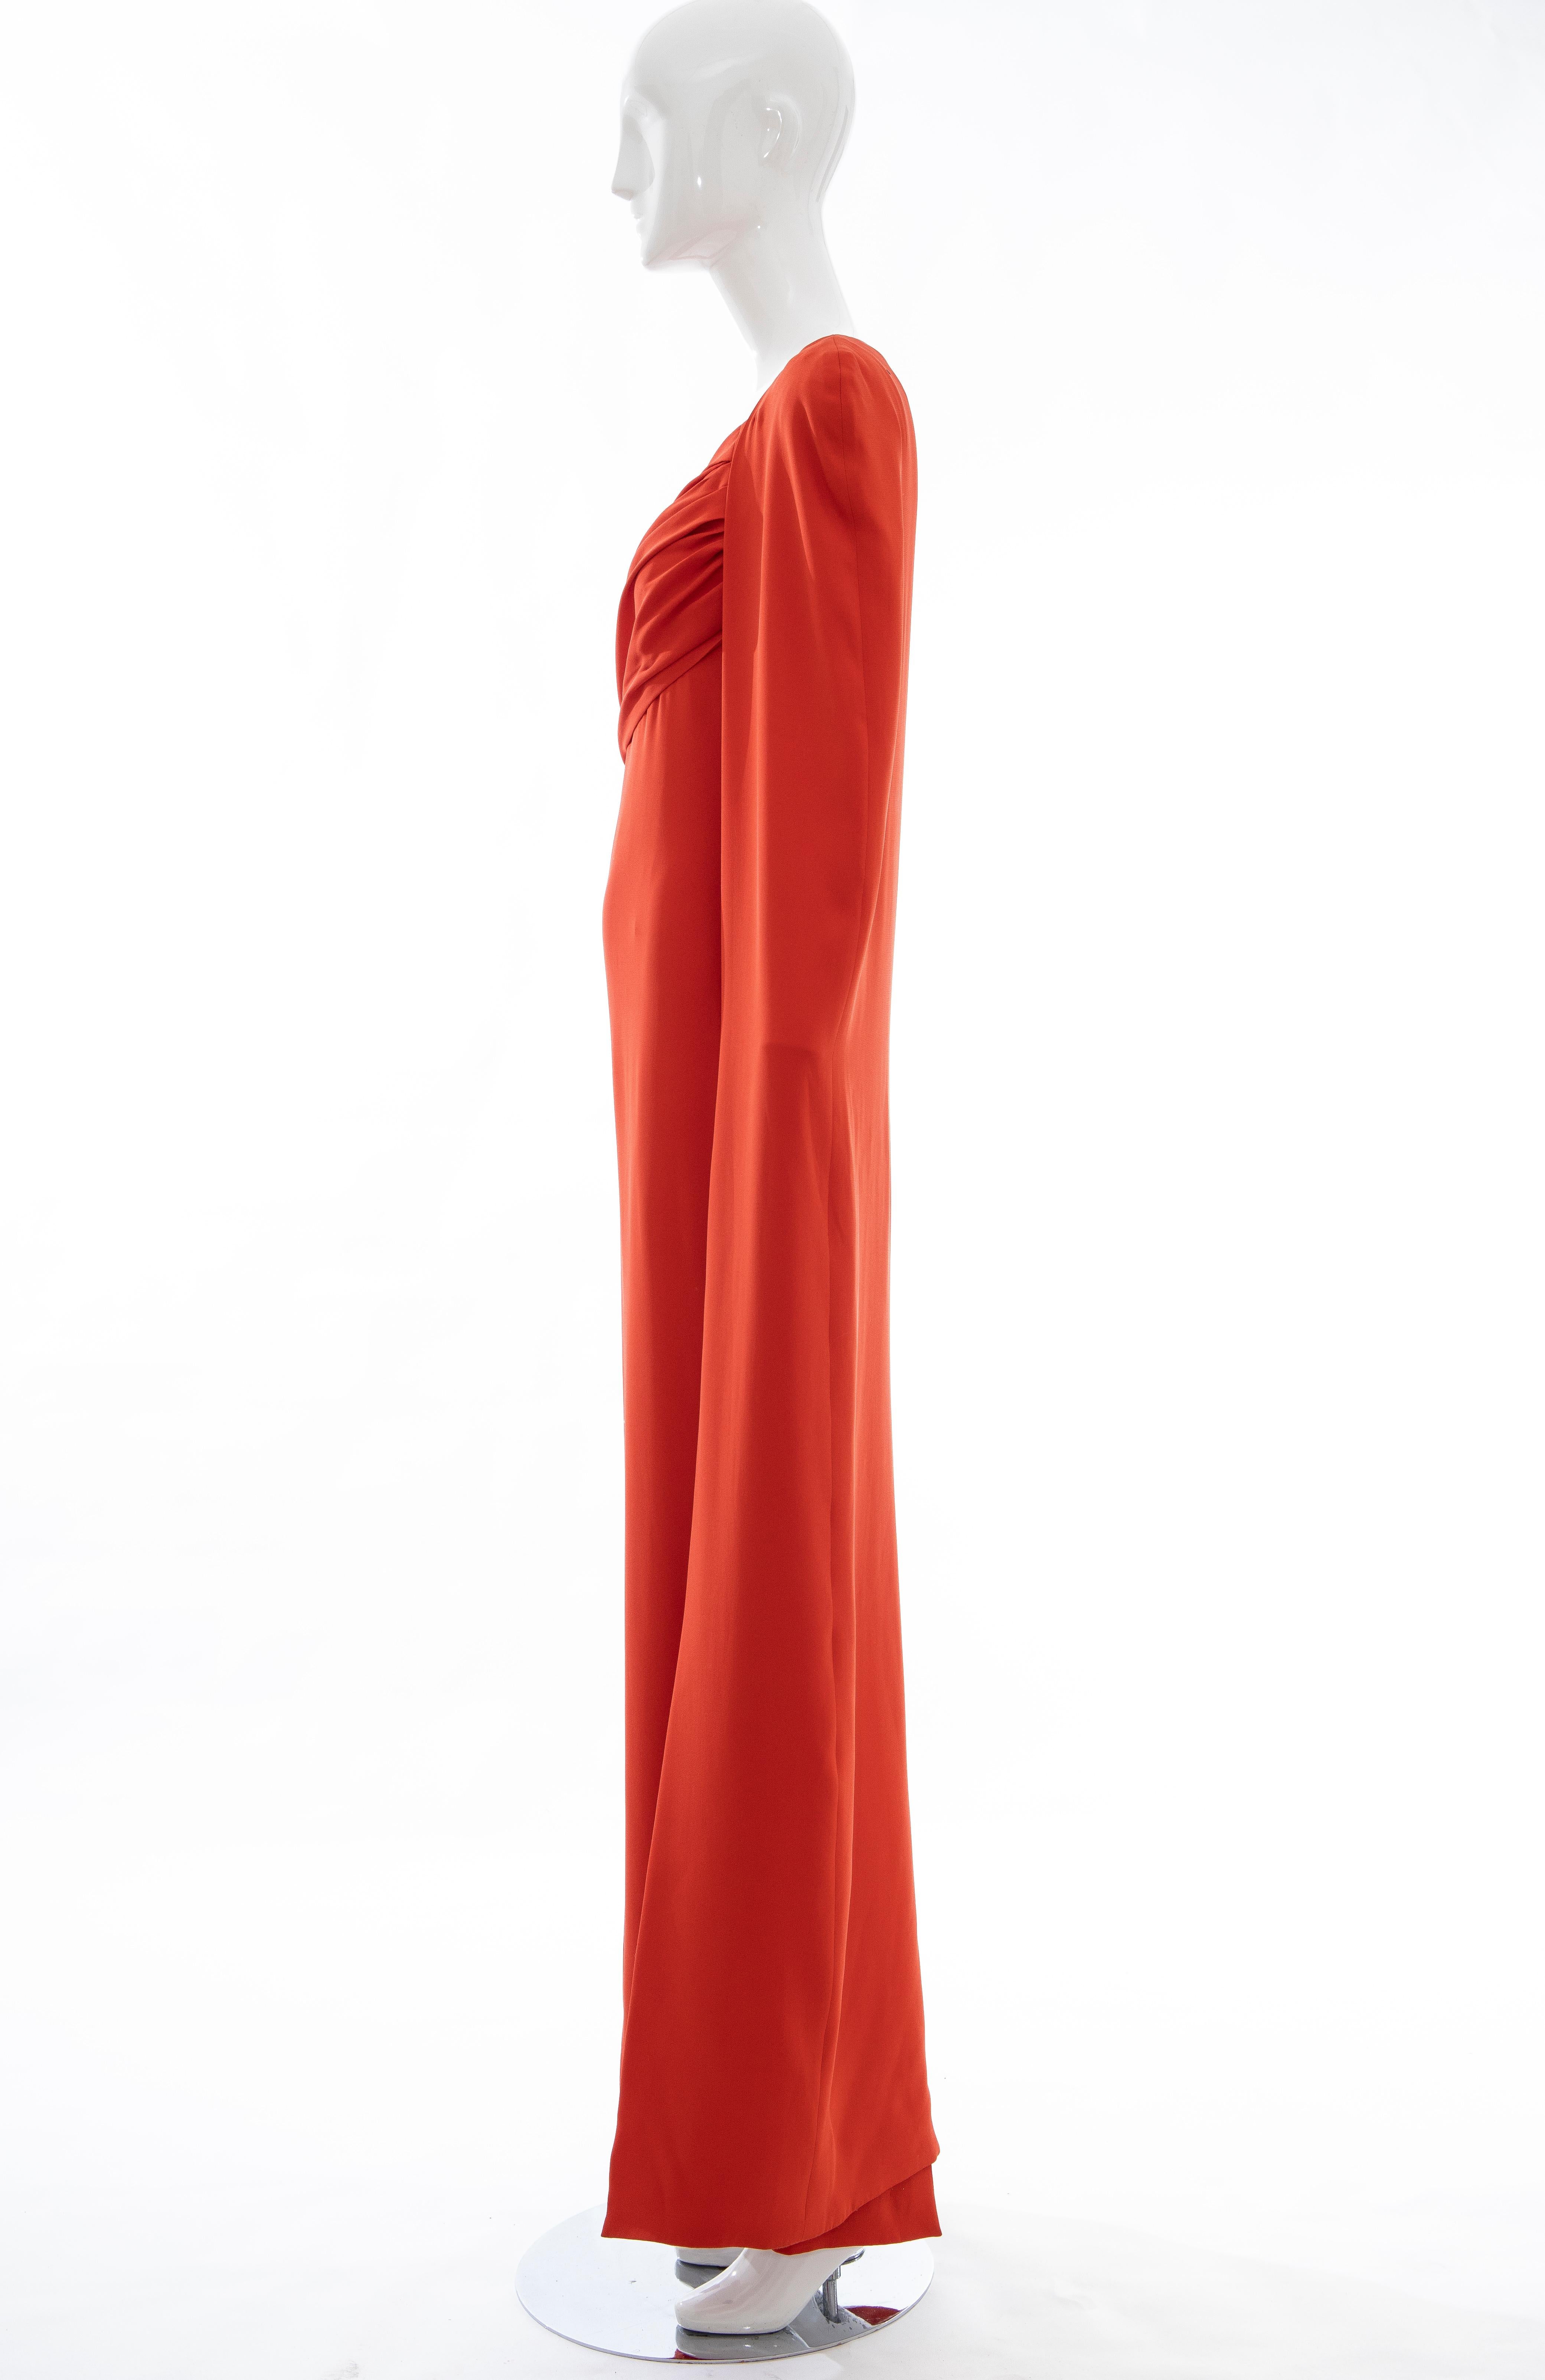 Tom Ford Runway Silk Persimmon Evening Dress With Cape, Fall 2012 1